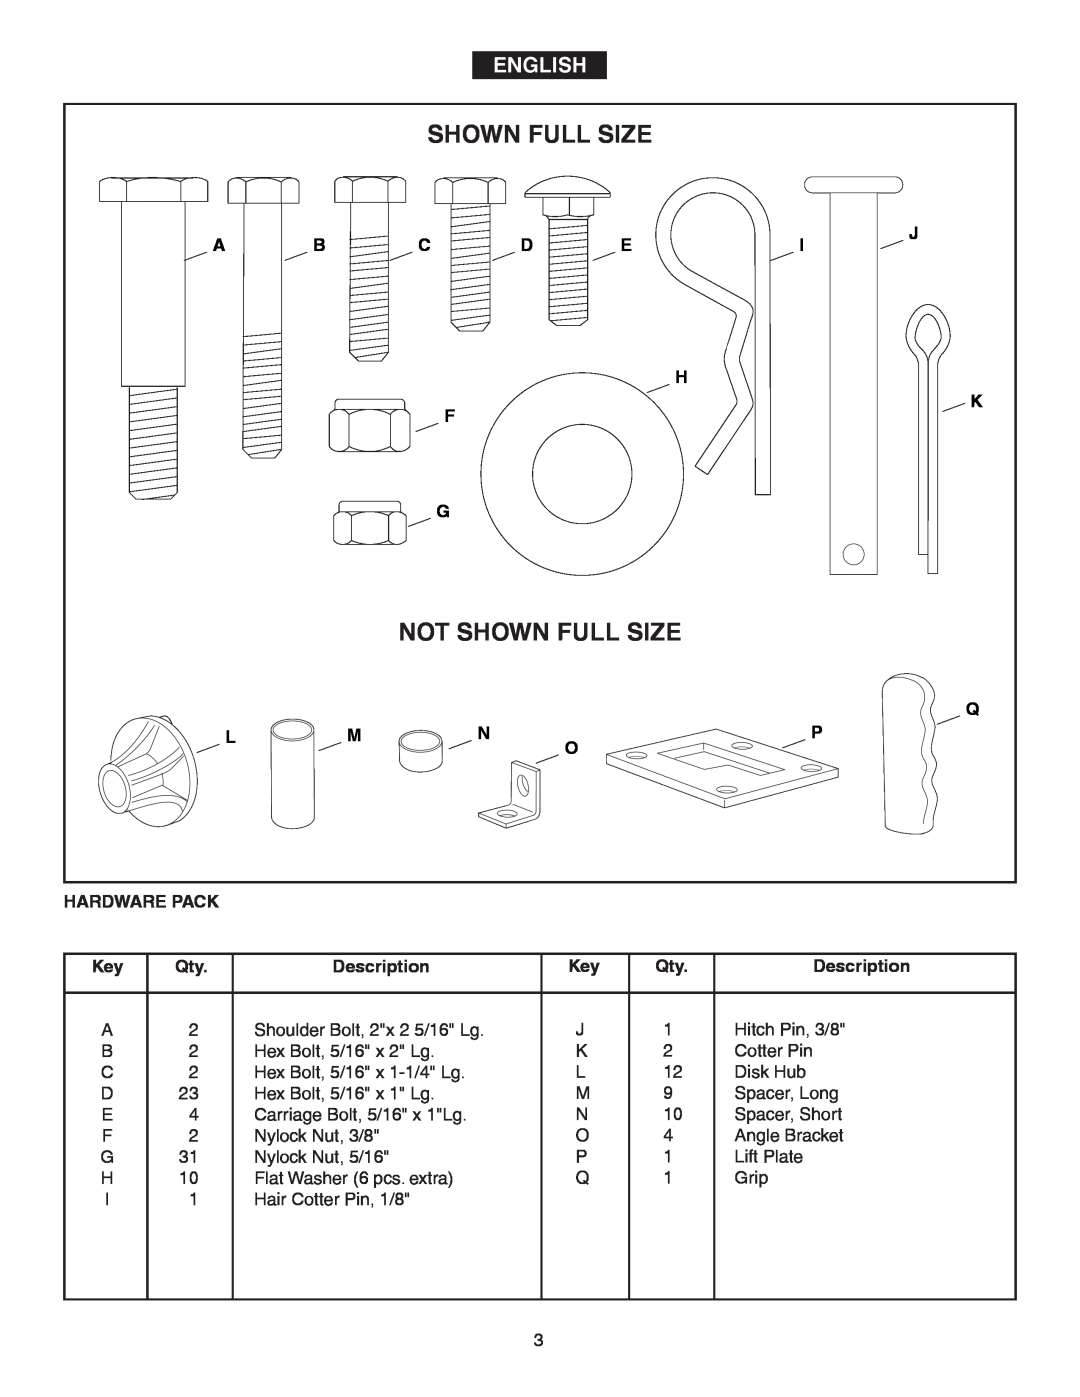 Agri-Fab 45-0346 owner manual Not Shown Full Size, English, Hardware Pack, Description 